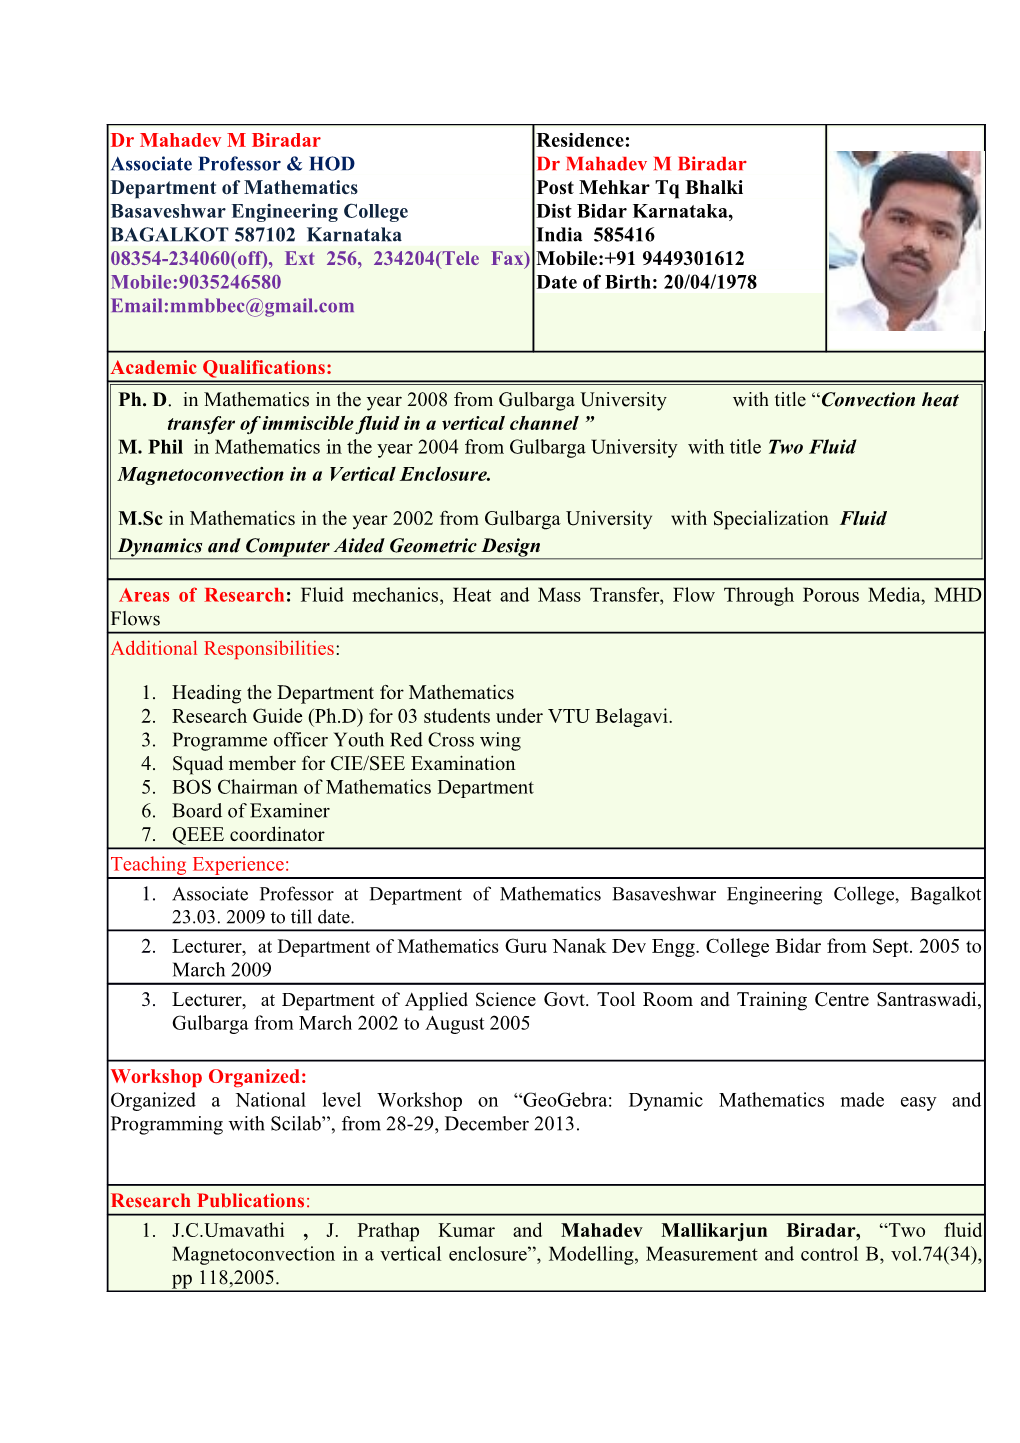 Ph. D. in Mathematics in the Year 2008 from Gulbarga Universitywith Title Convection Heat